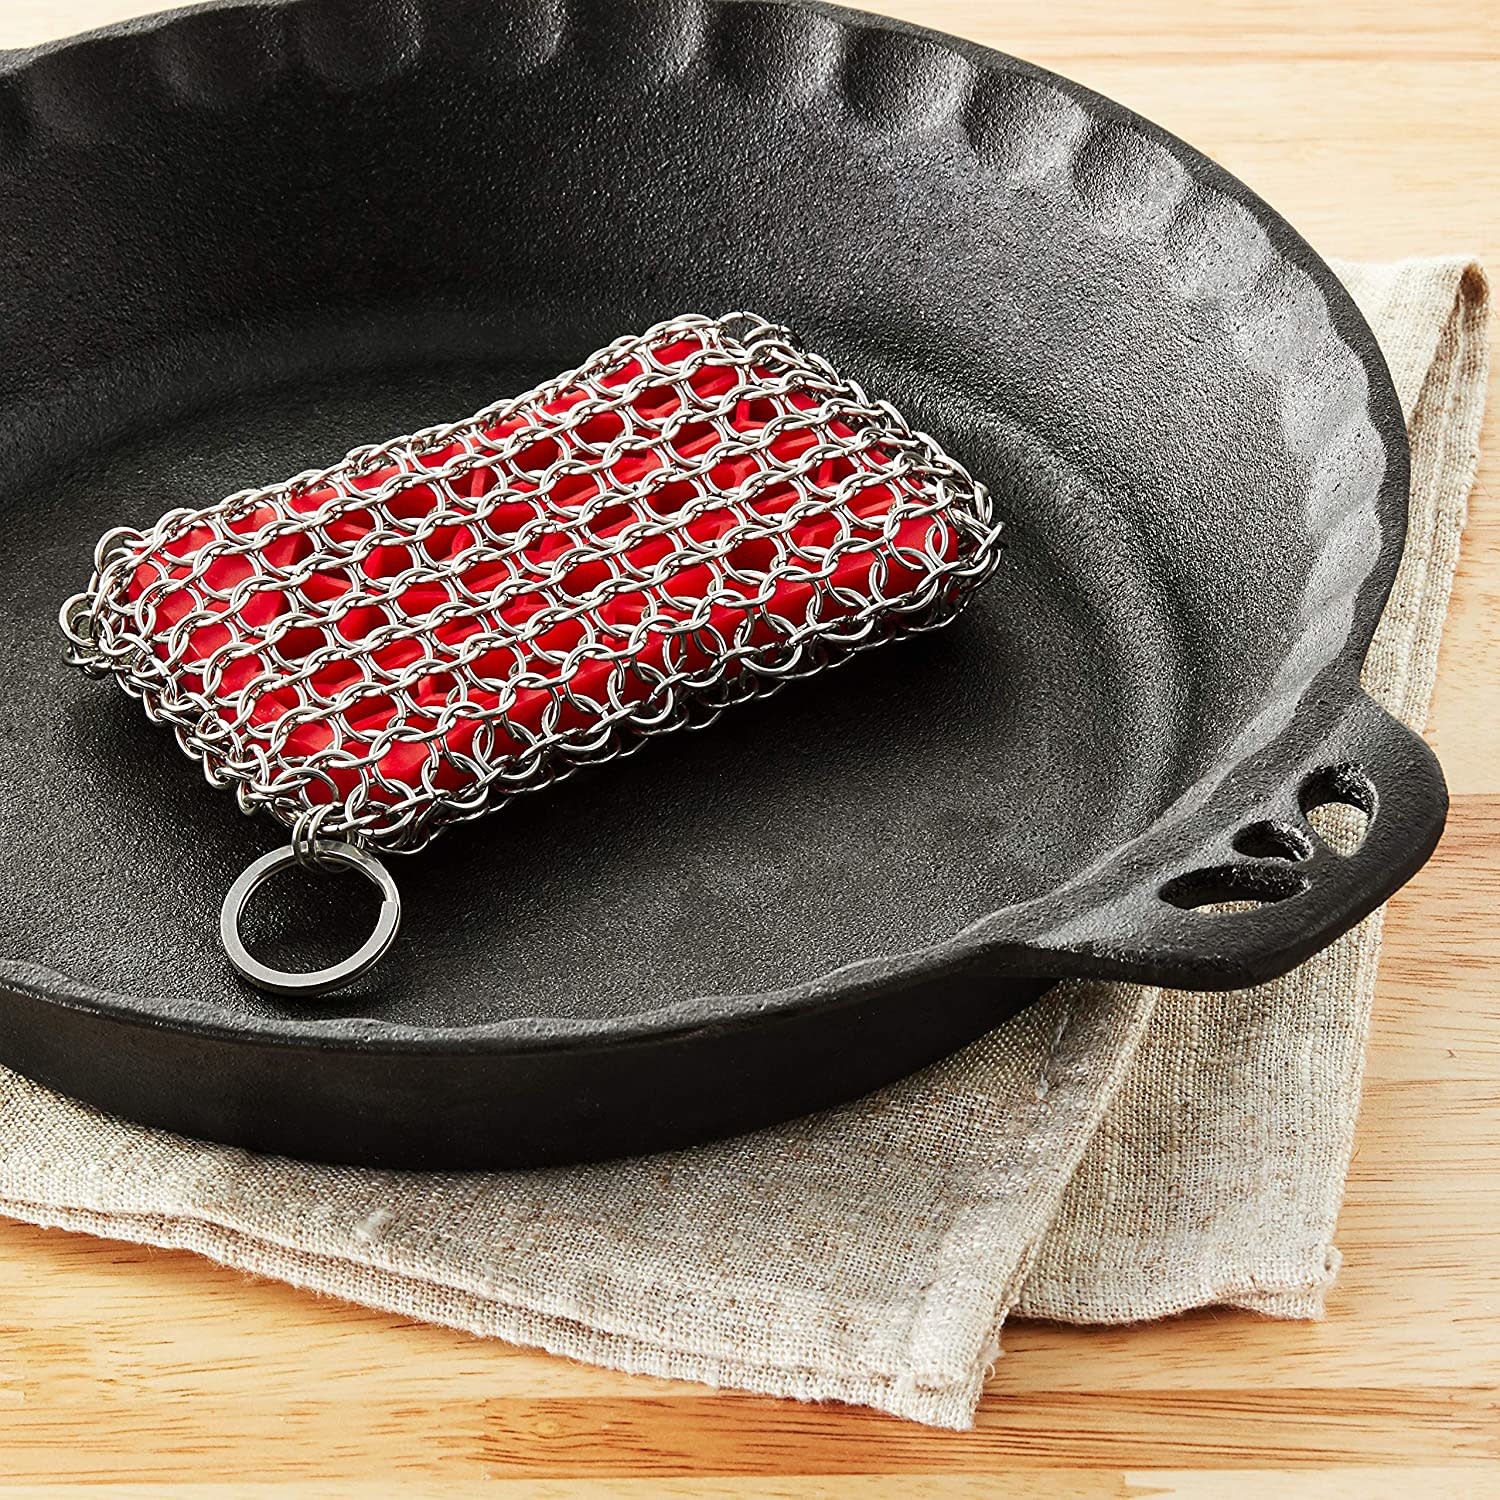 Cast Iron Cleaning Kit with Chainmail Scrubber & Pan Scraper Ergonomic Grip  Home